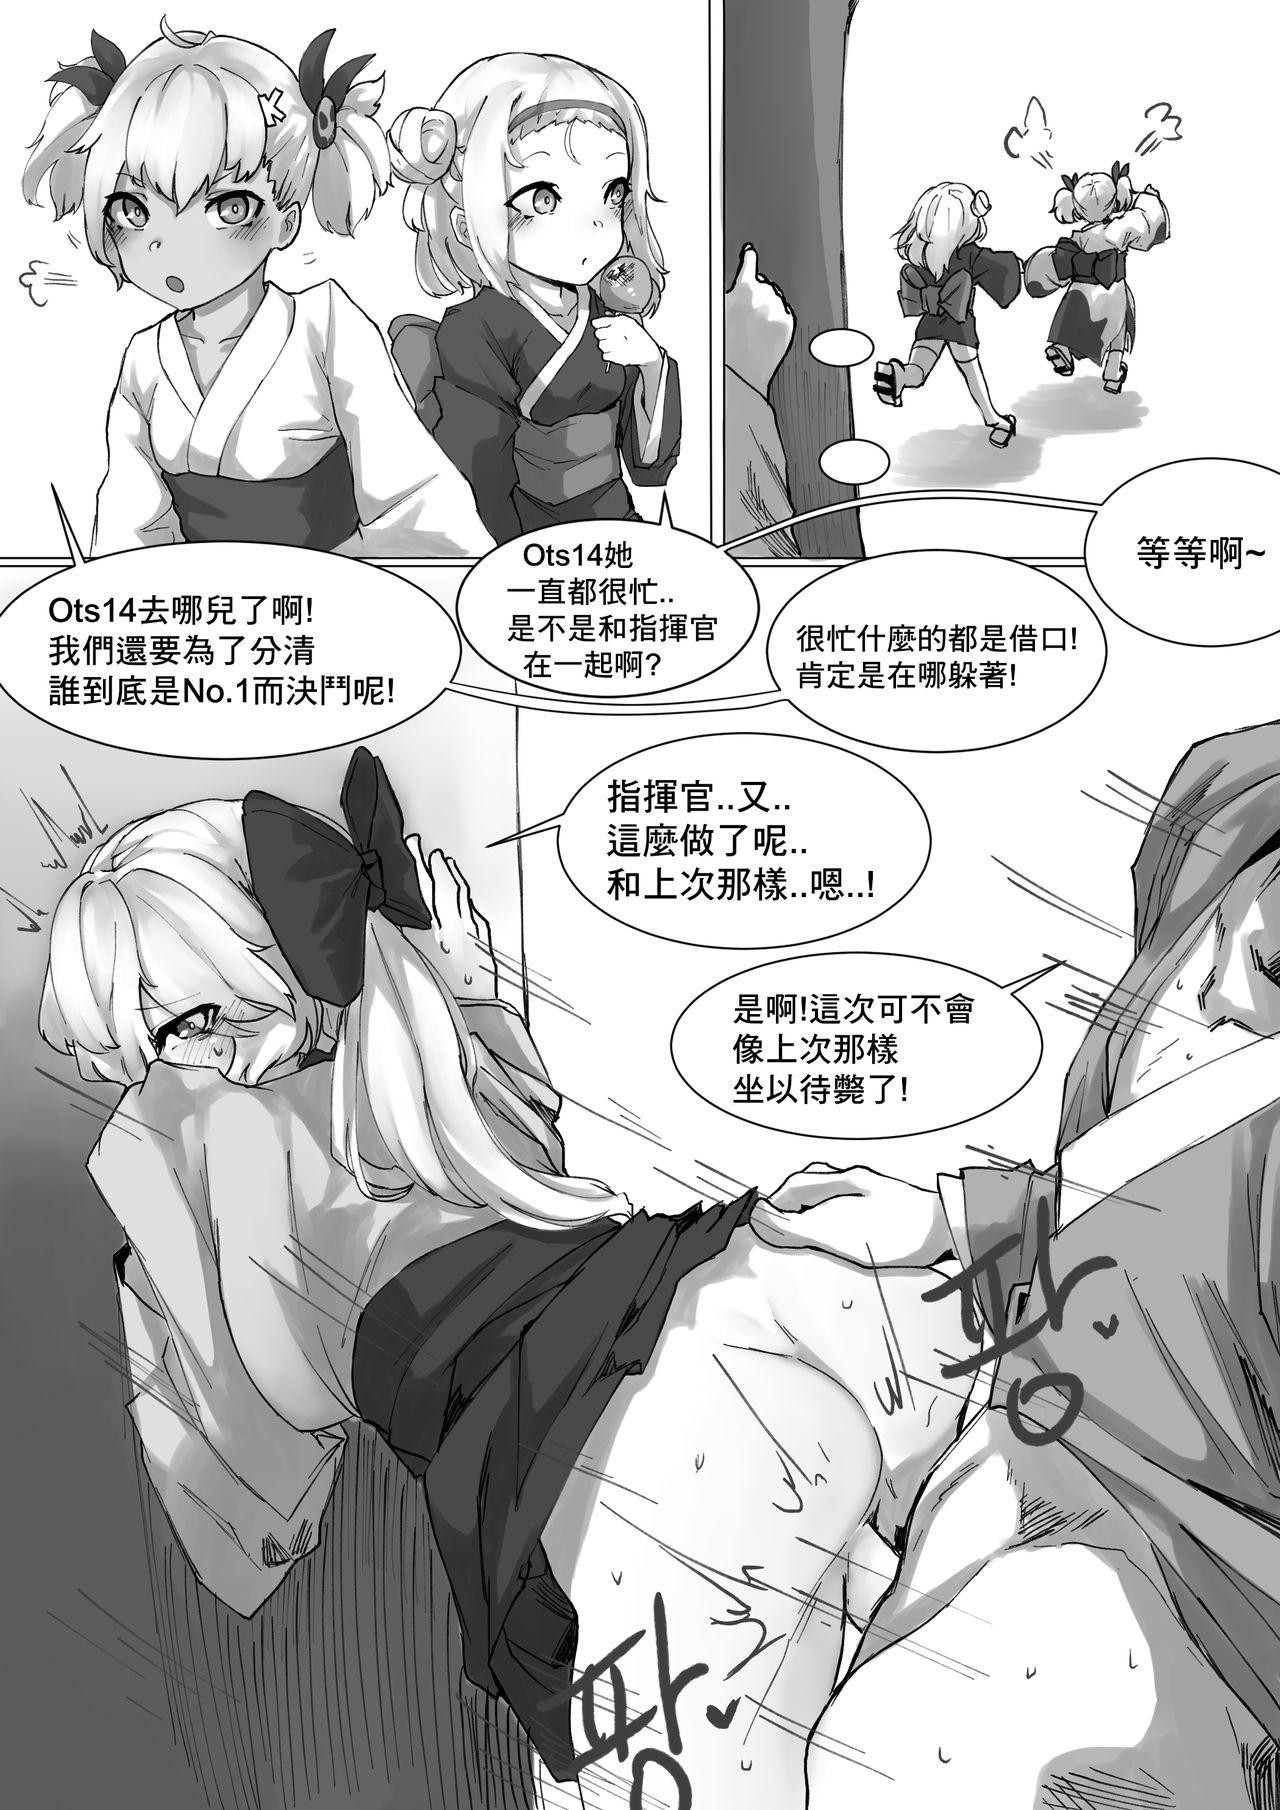 Office Fuck How To Use OTS-14 - Girls frontline Hot Naked Women - Page 10